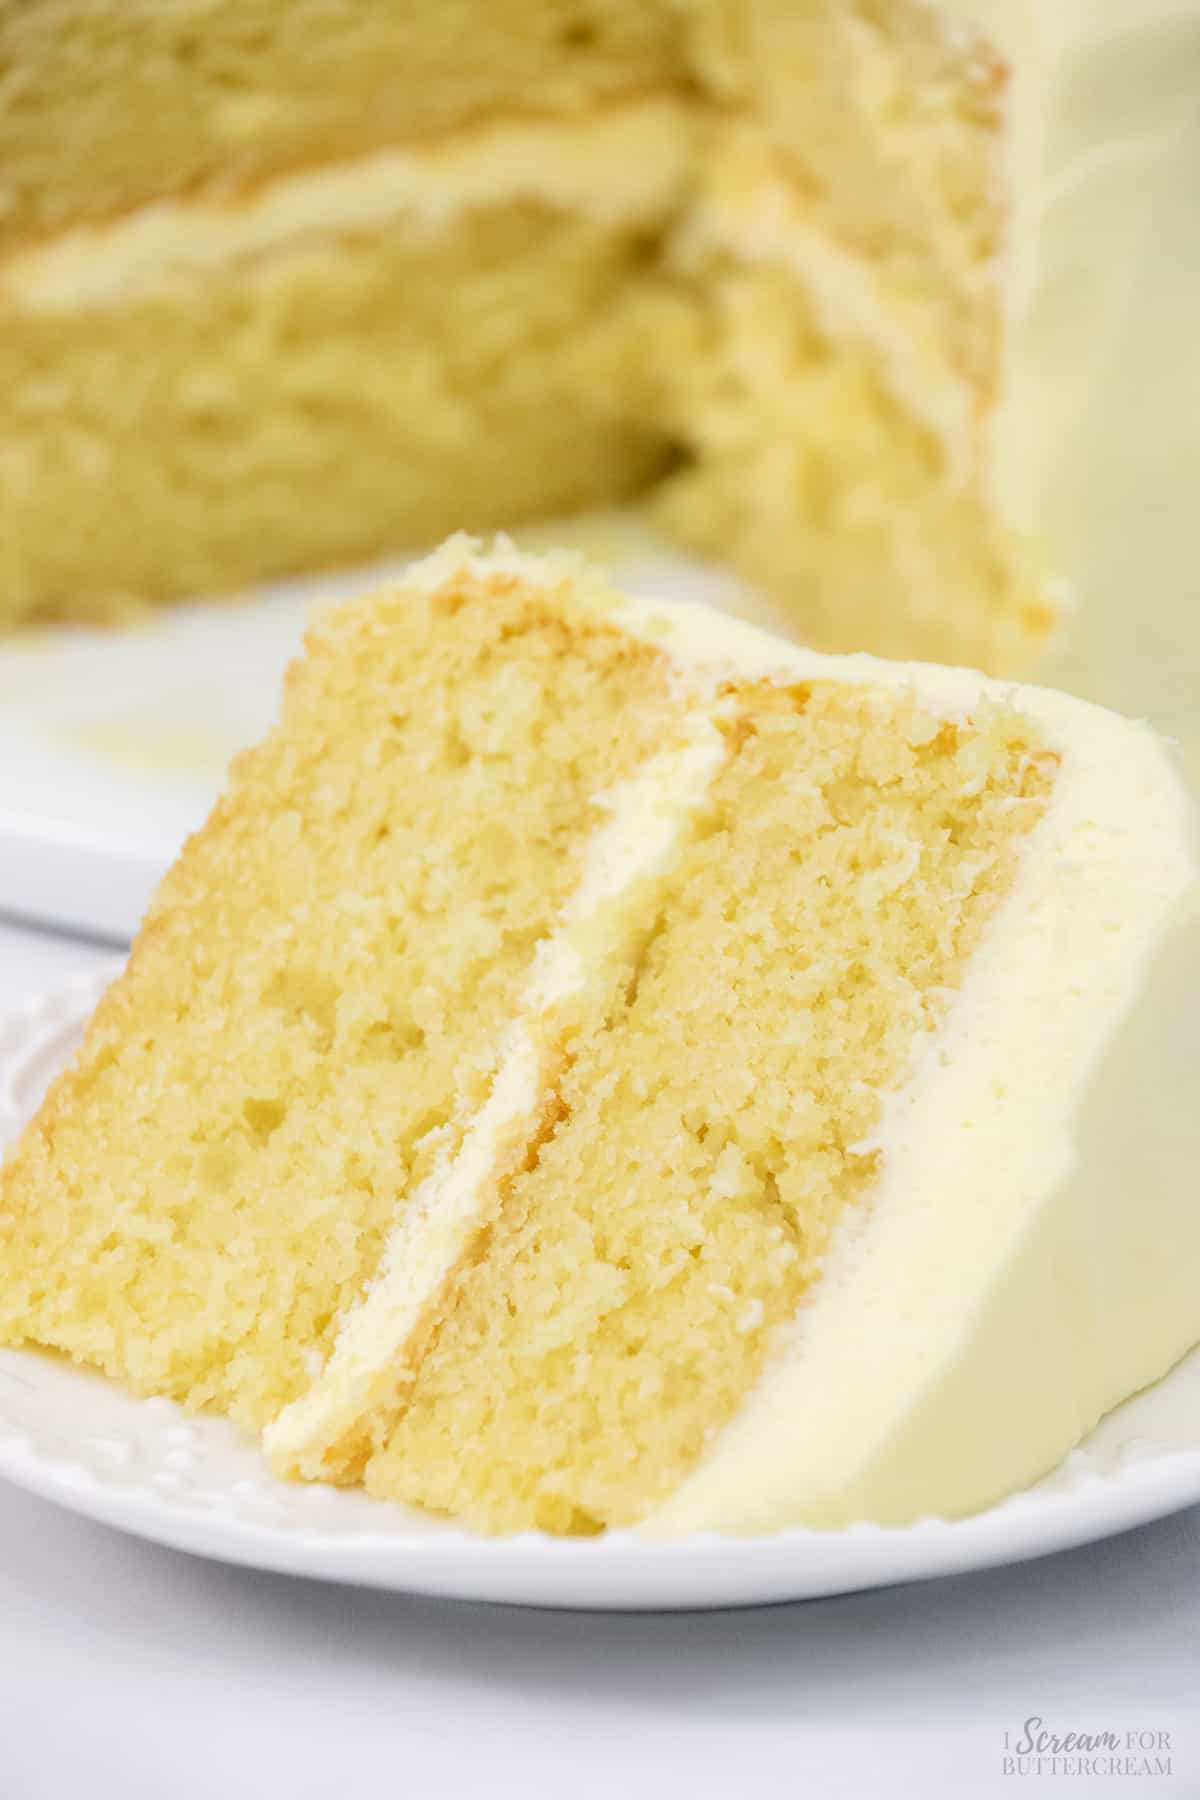 Tall image of lemon scratch cake with lemon frosting on a white plate.